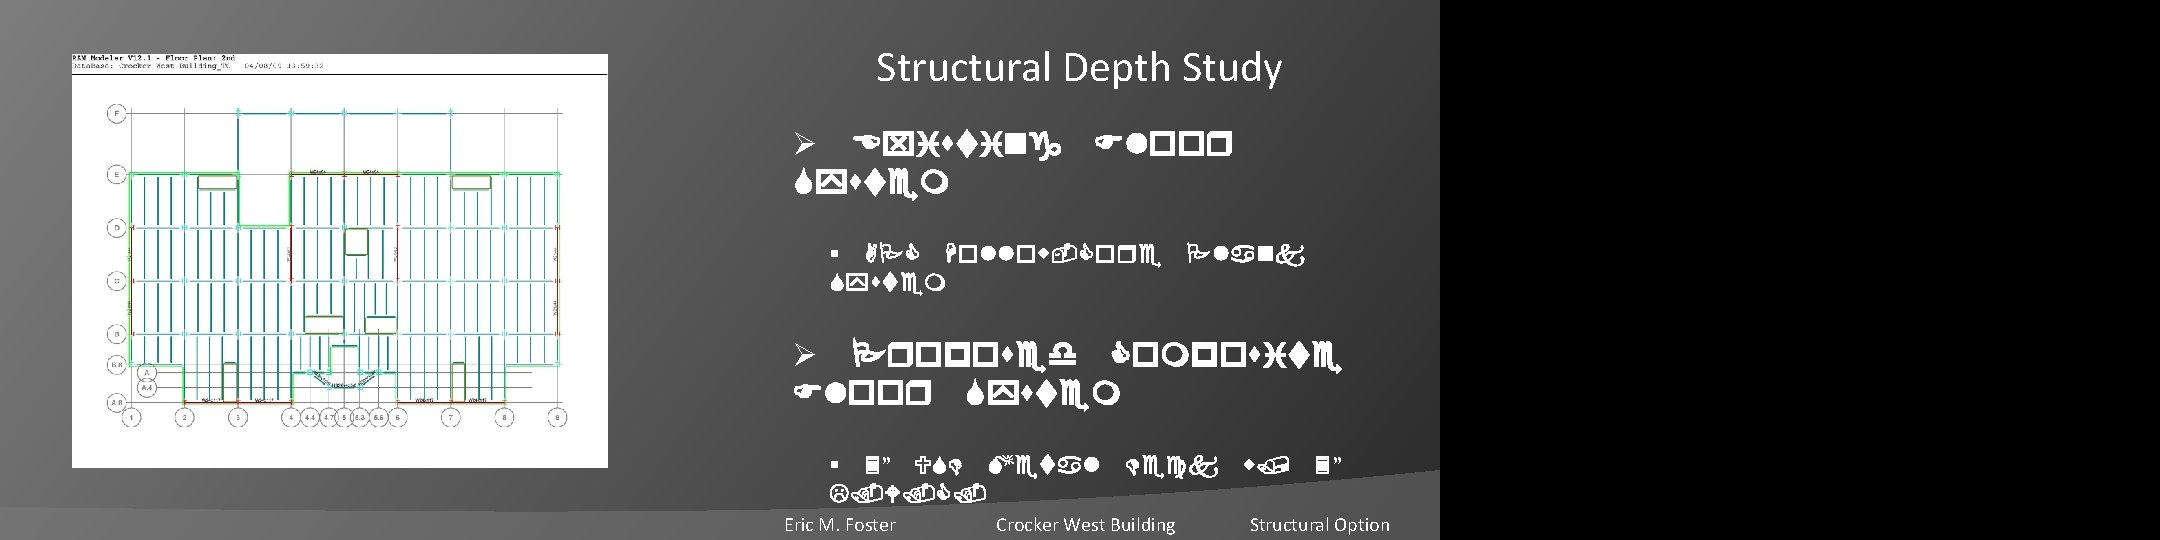 Structural Depth Study Ø Existing Floor System § APC Hollow-Core Plank System Ø Proposed